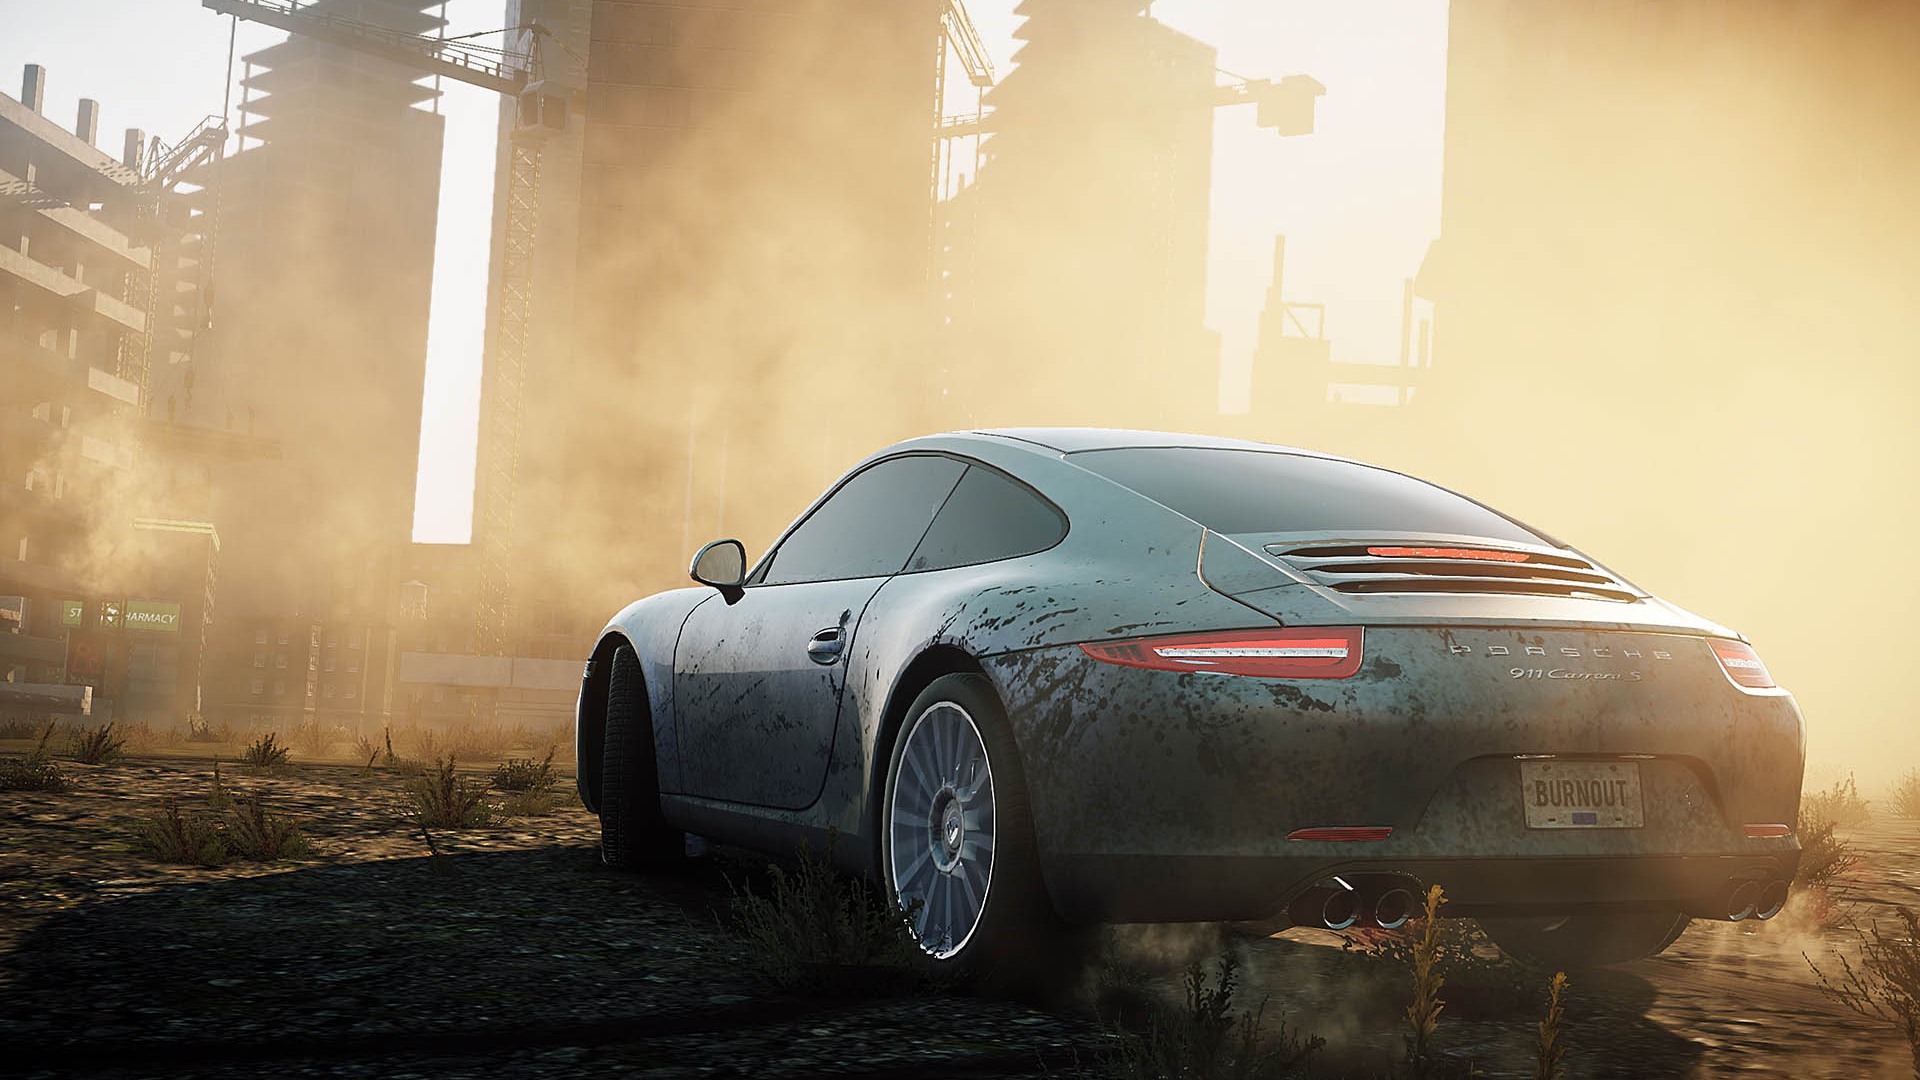 Need for Speed: Most Wanted 极品飞车17：最高通缉 高清壁纸14 - 1920x1080